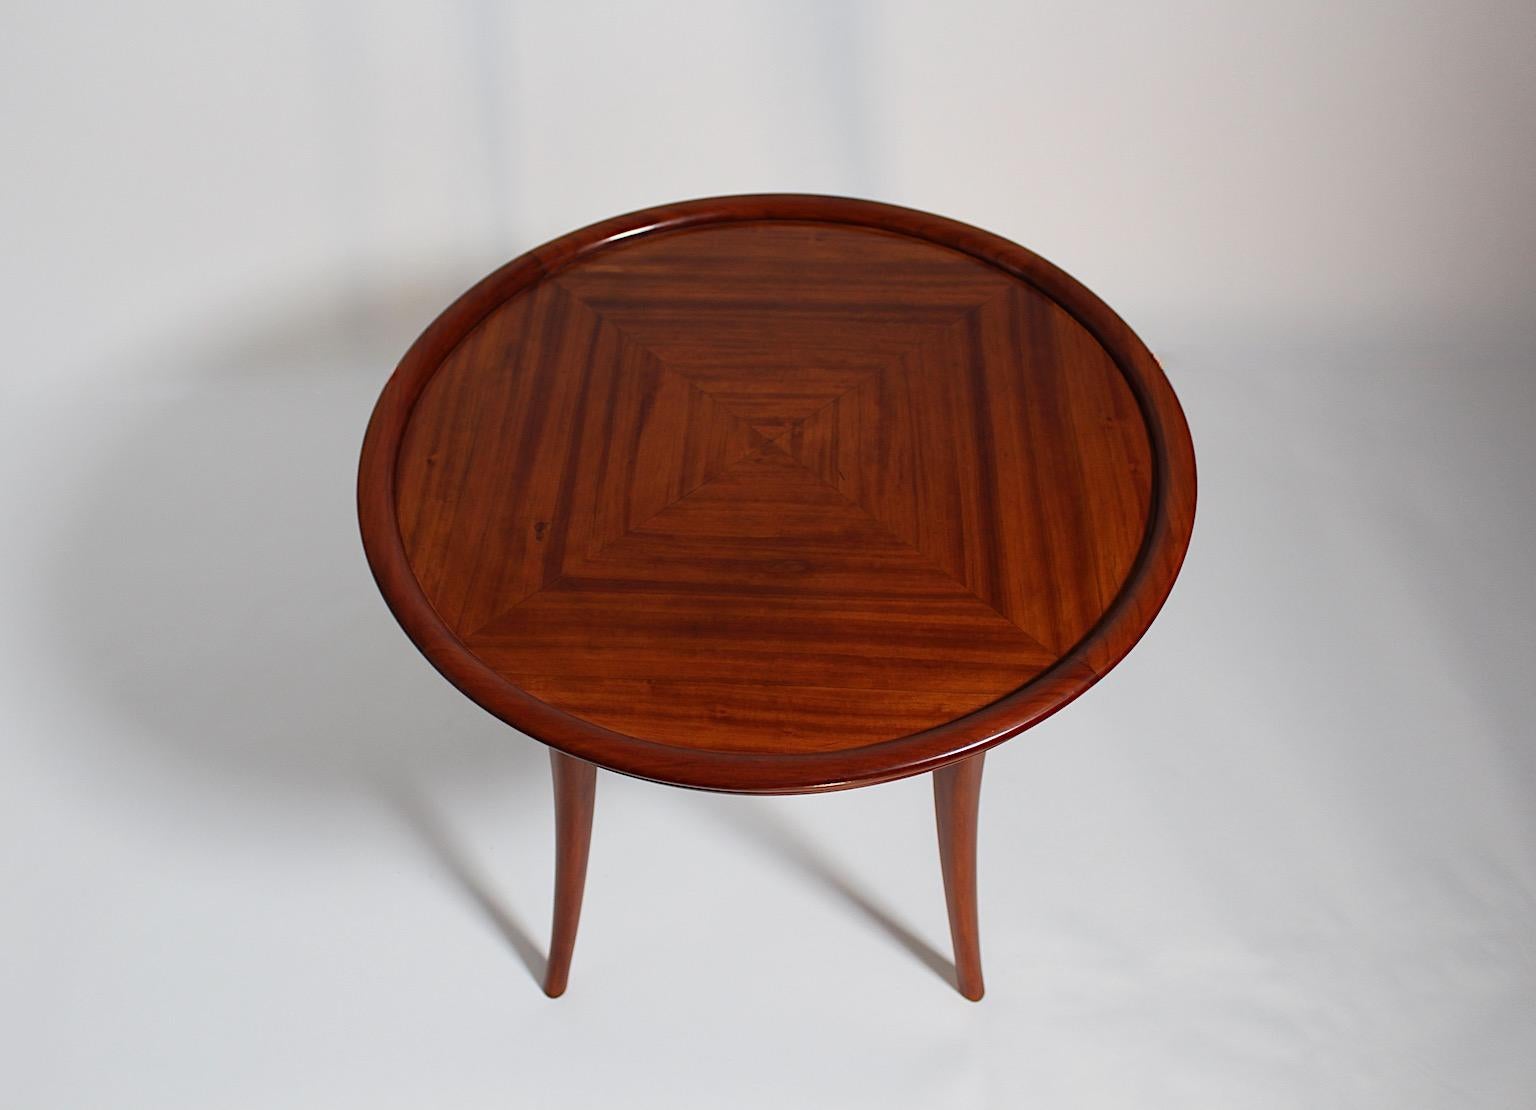 Mid-20th Century Art Deco Vintage Walnut Circular Coffee Table Side Table 1930s Vienna For Sale